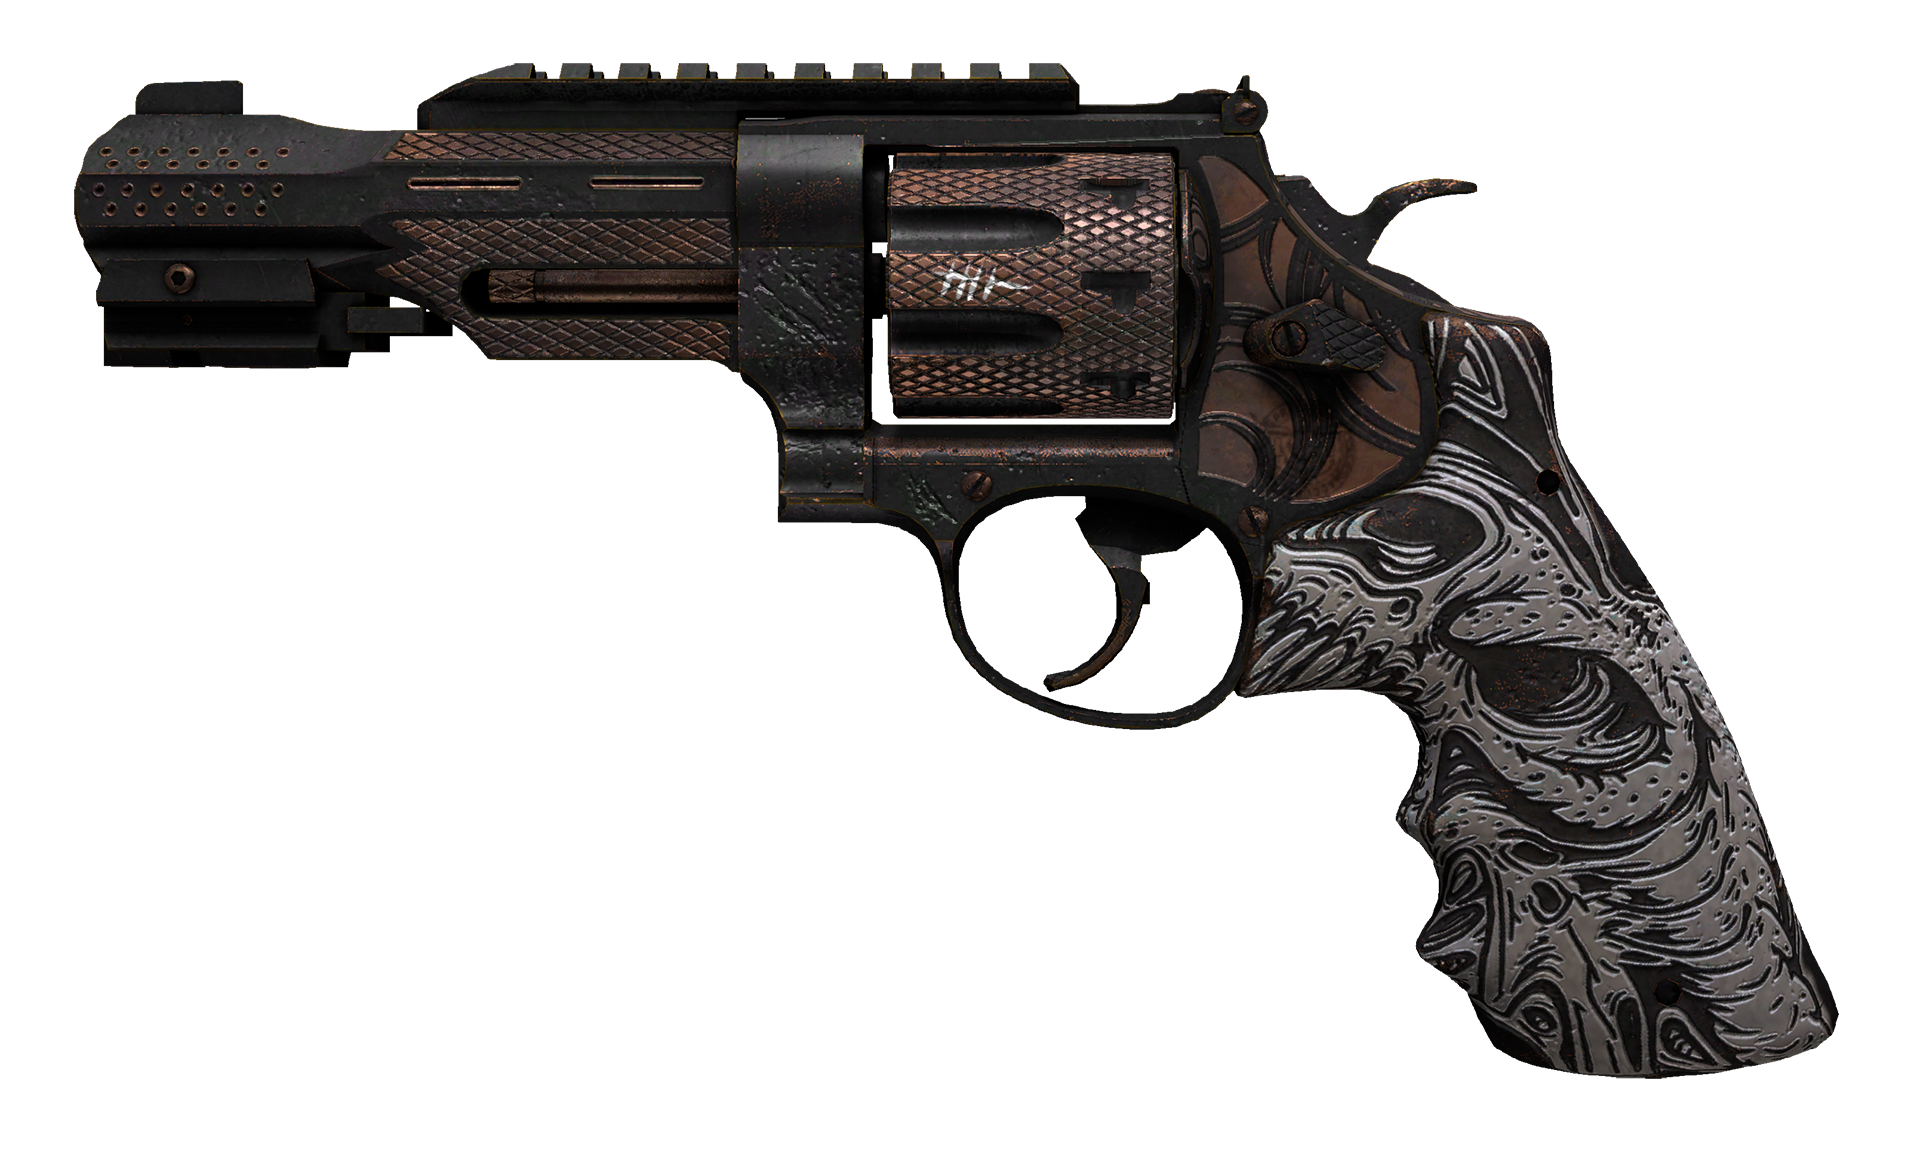 R8 Revolver Canal Spray cs go skin download the last version for android